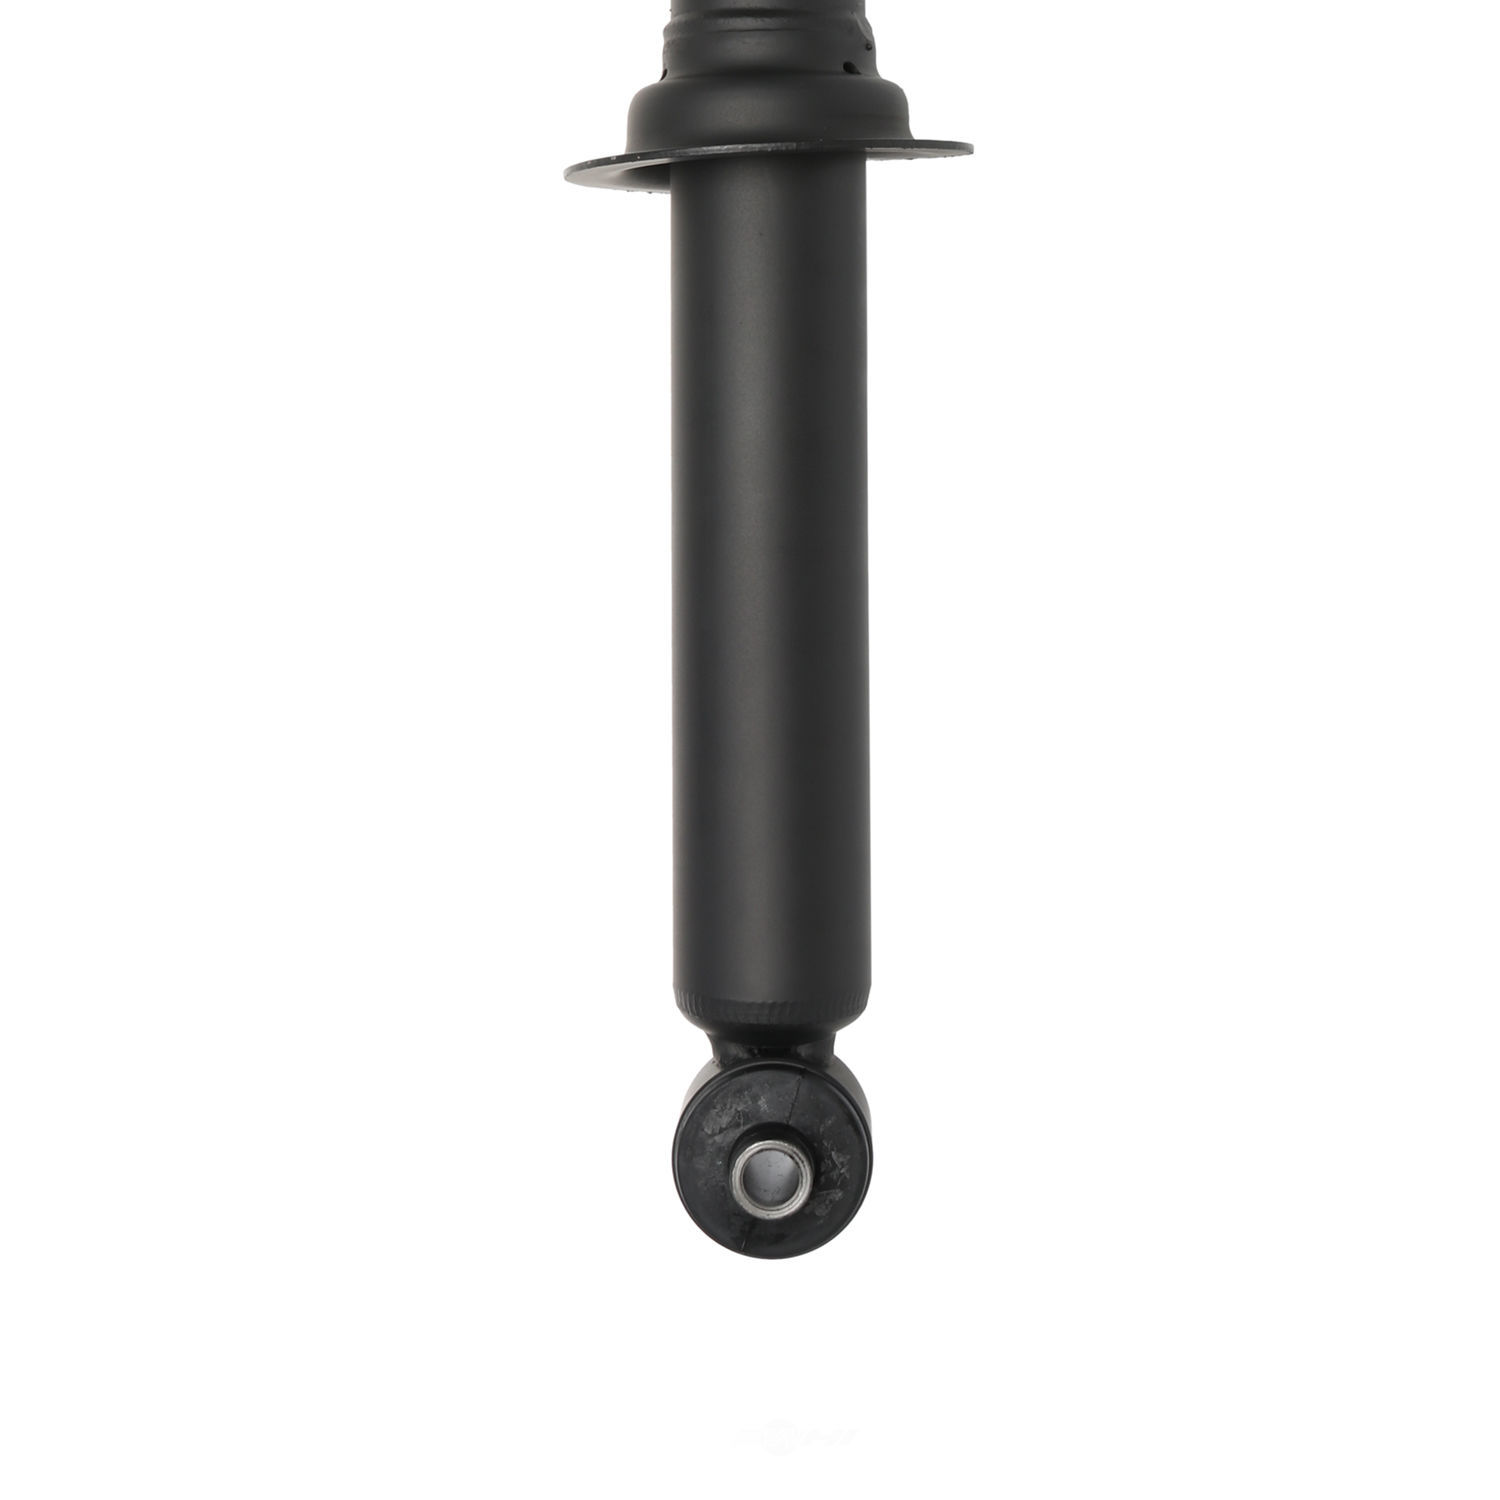 PERFORMANCE RIDE TECHNOLOGY BY ADD - Suspension Strut Assembly - P6T 372046